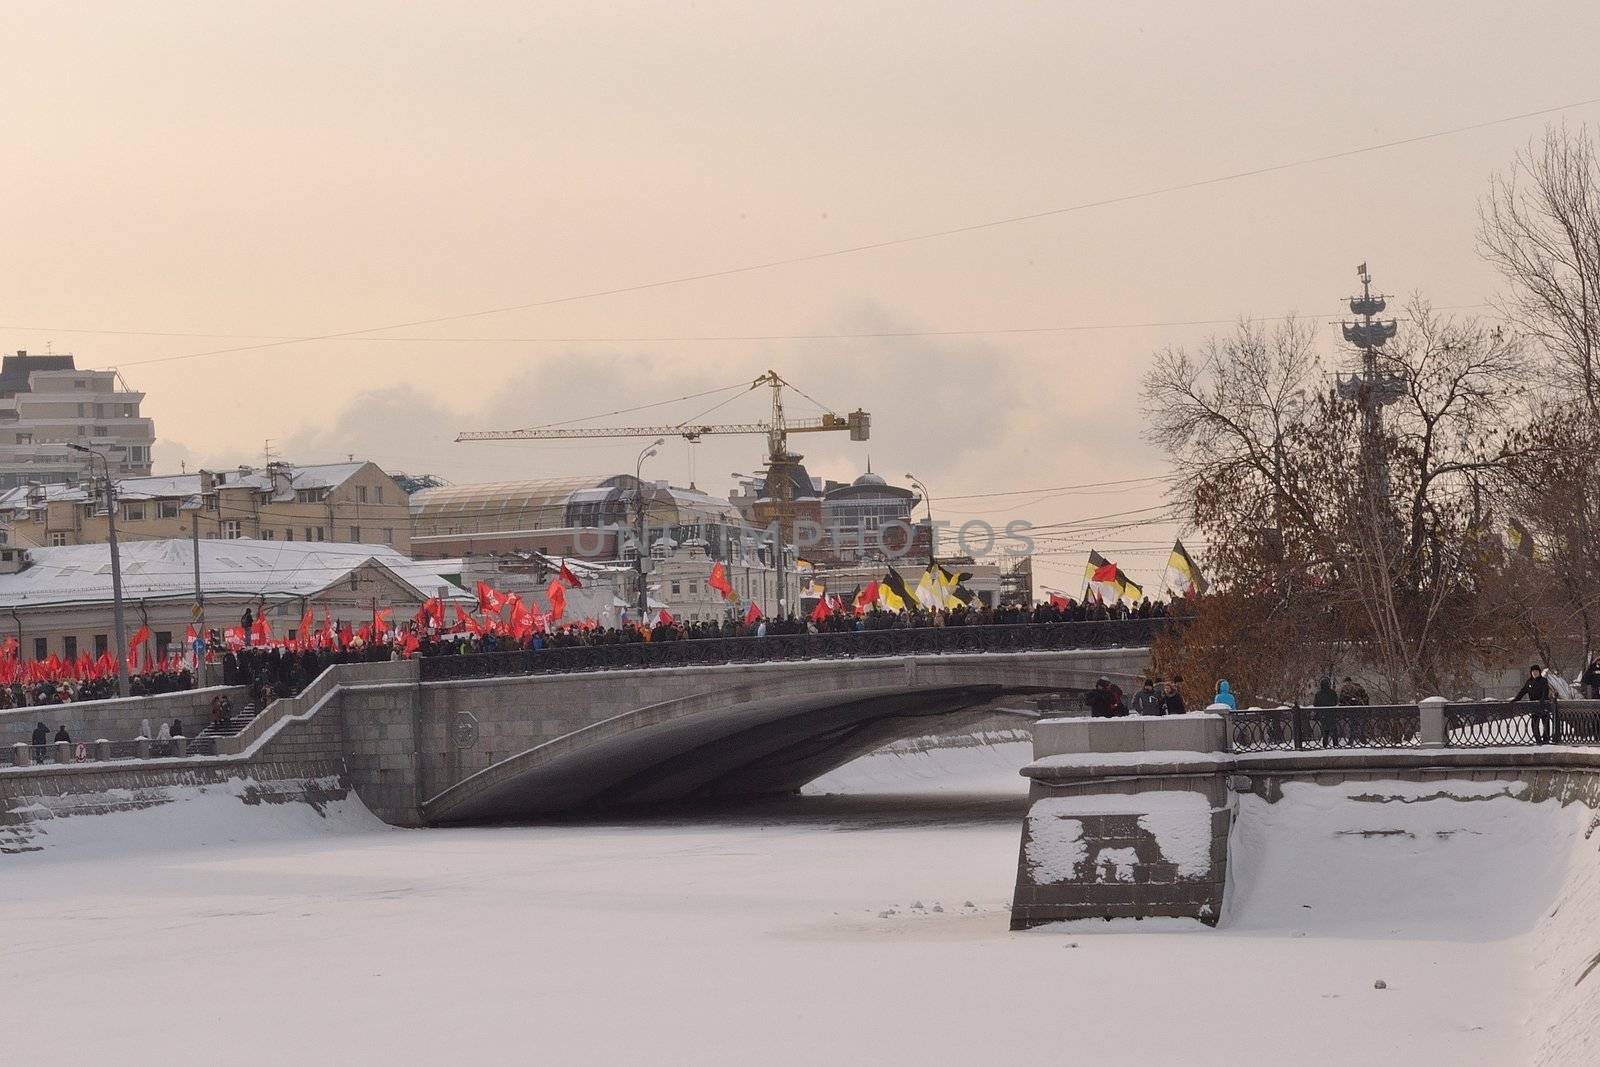 Moscow, view of the processing for the fair elections on Small Stone Bridge, February 4th, 2012 Red flags are communist, the others (yellow-white-black) old Russian imperial flags representing nationalists